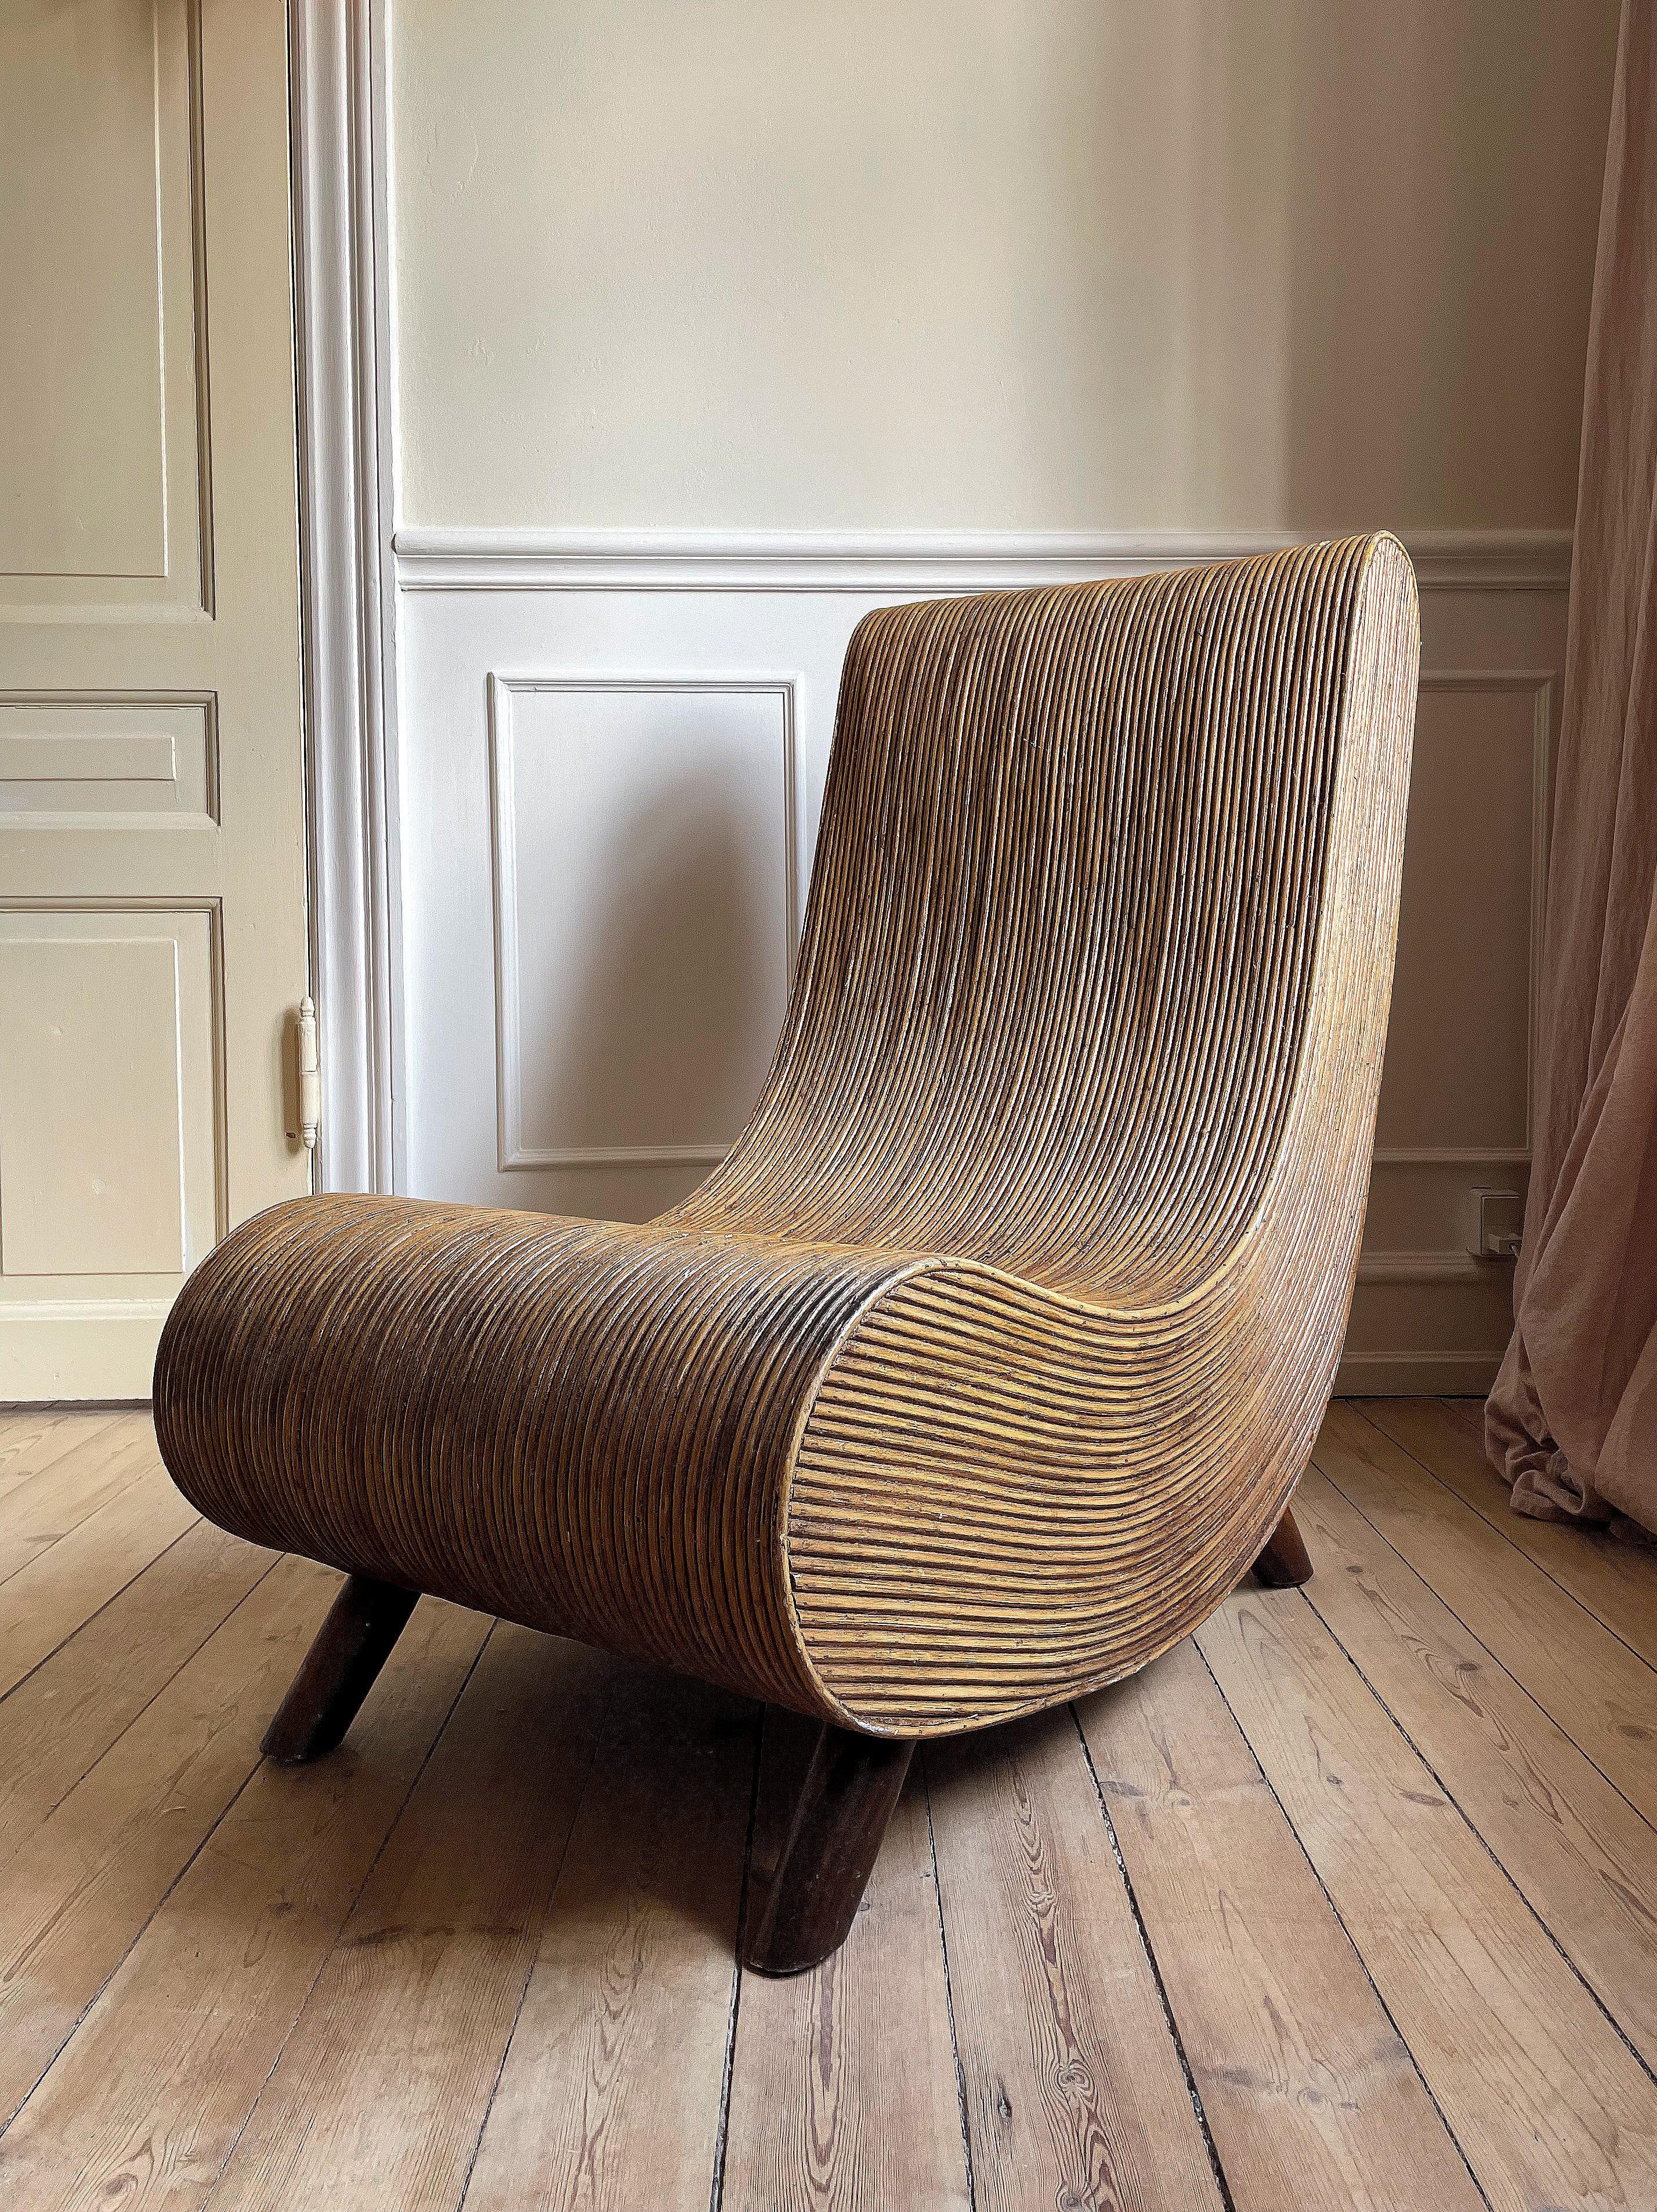 Stunning handmade Vivai del Sud Mid-Century Modern piece of Mediterranean organic, sculptural and simplistic furniture inspired by Gabriella Crespi. Soft shaped natural tropicalist pencil reed bent bamboo lounge chair with wooden legs. A rare find